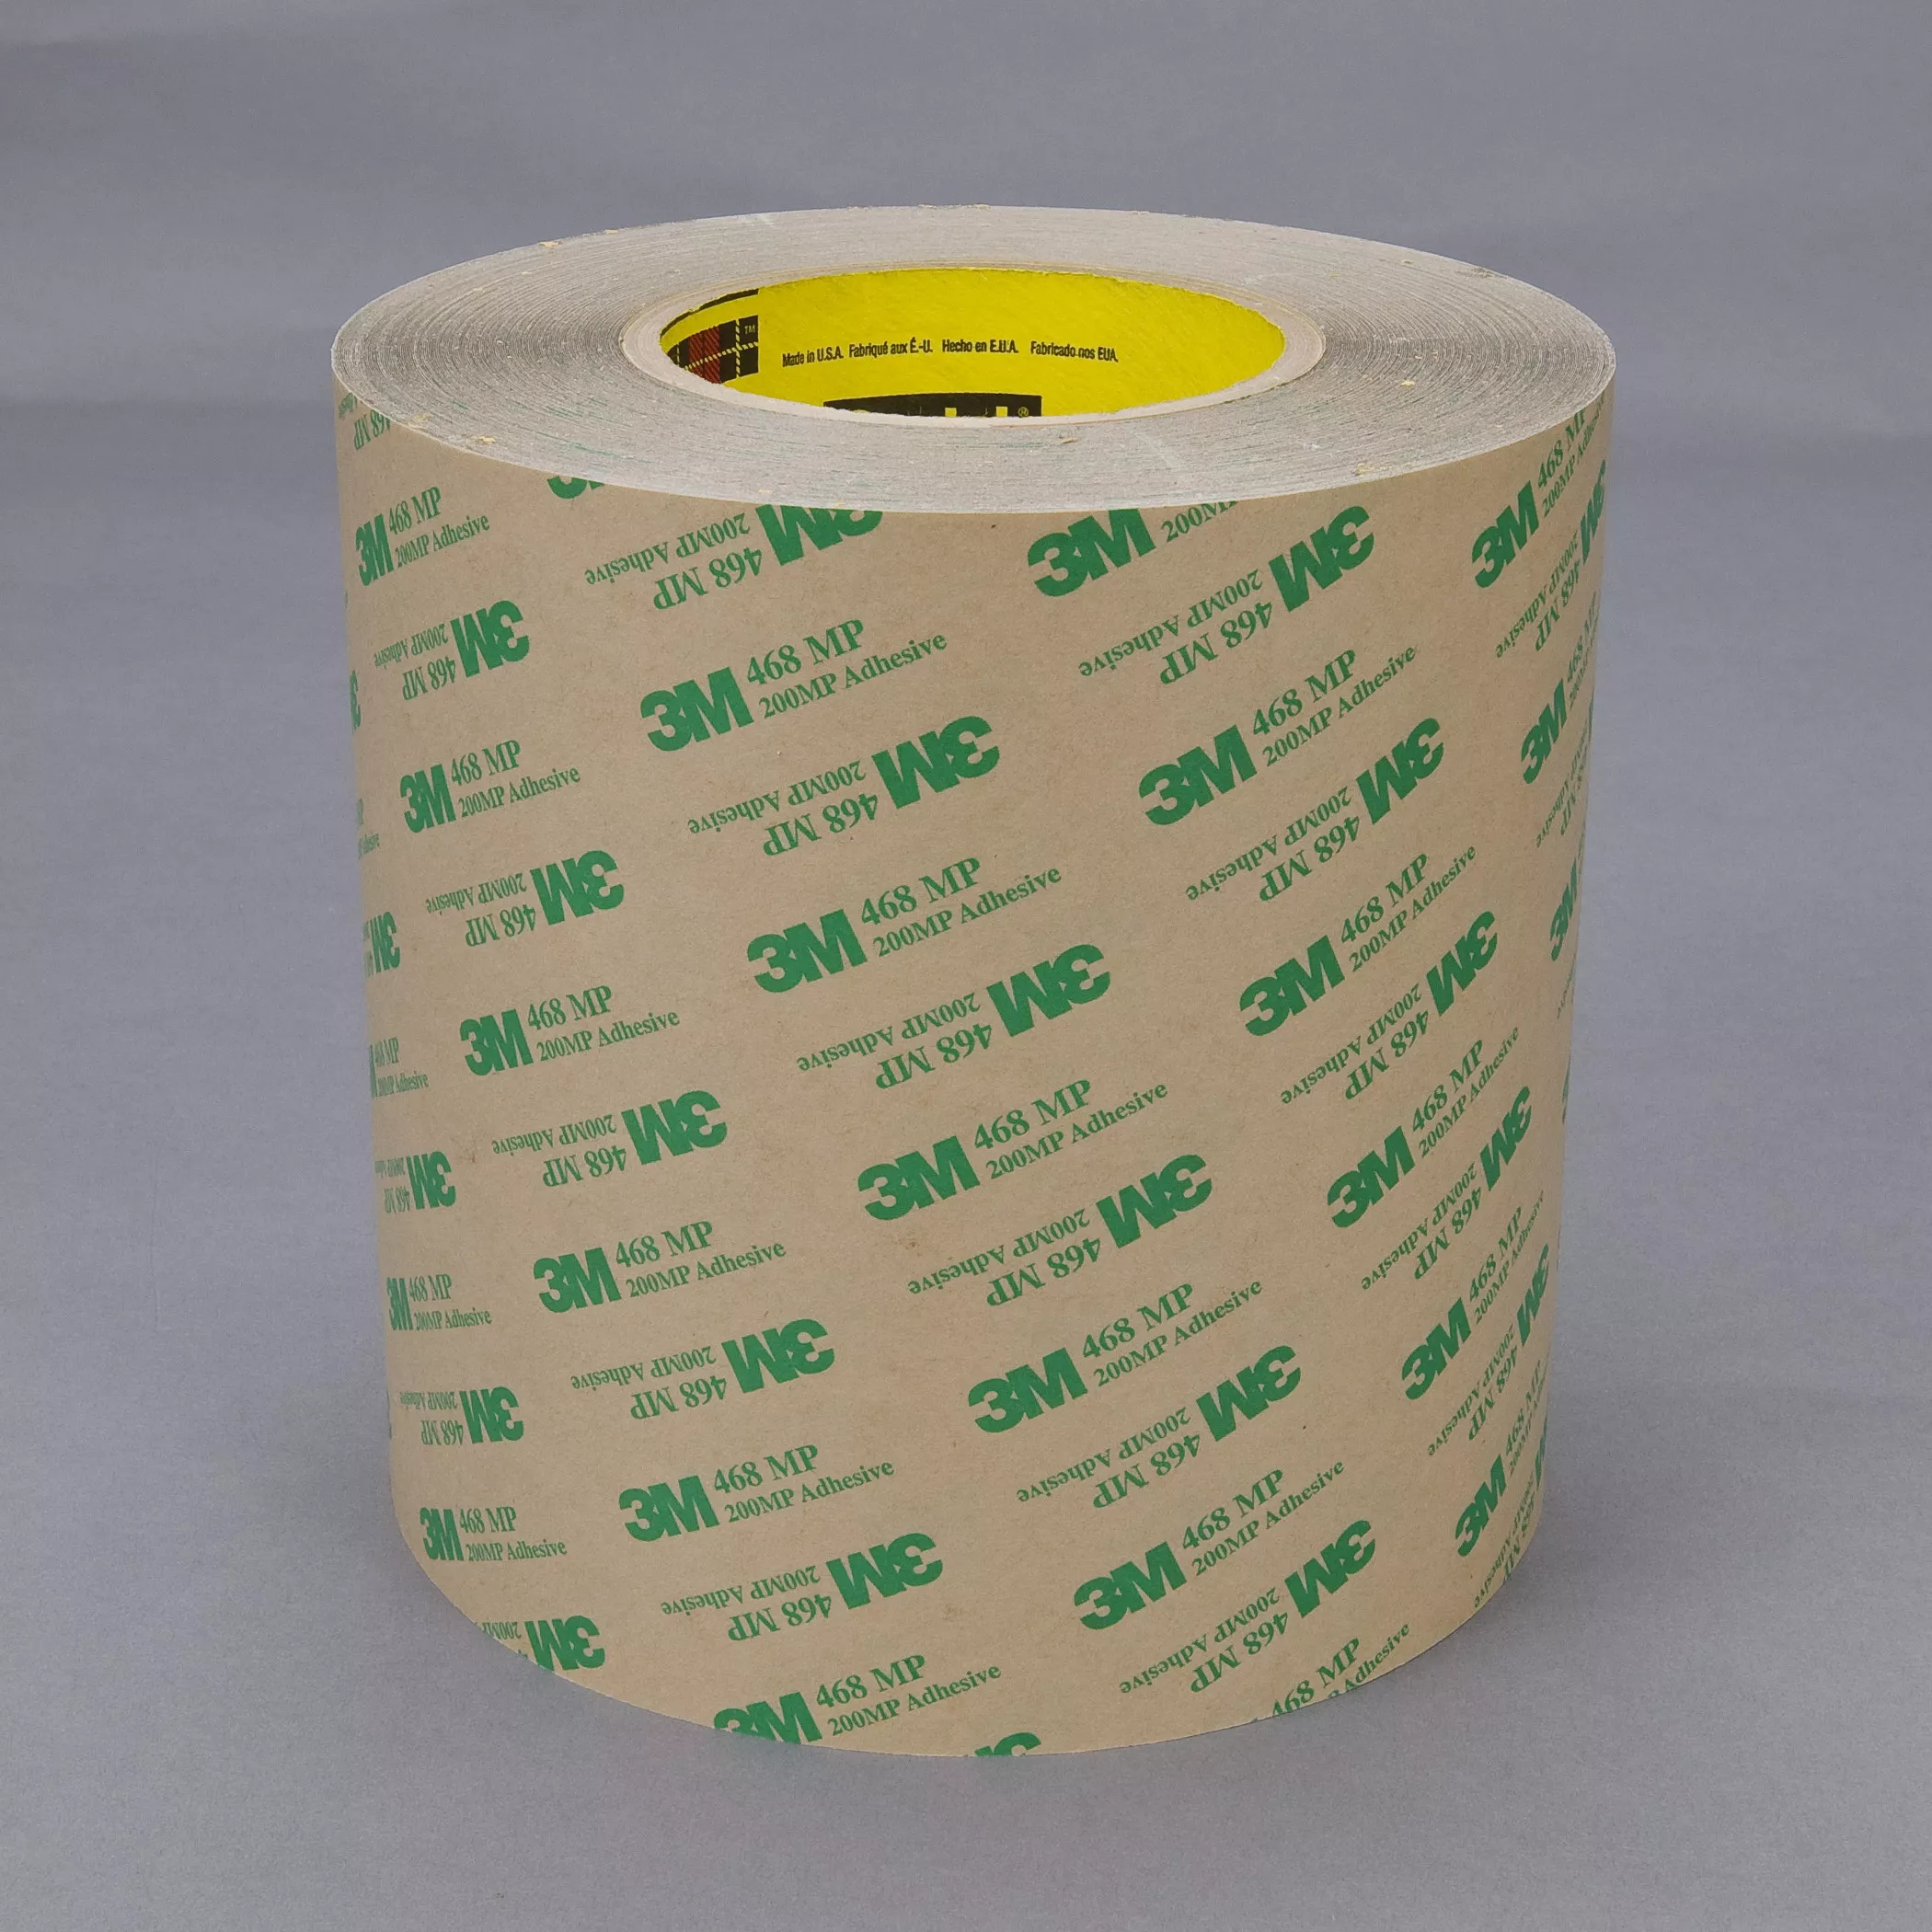 3M™ Adhesive Transfer Tape 468MP, Clear, 13 in x 60 yd, 5 mil, 4
Roll/Case